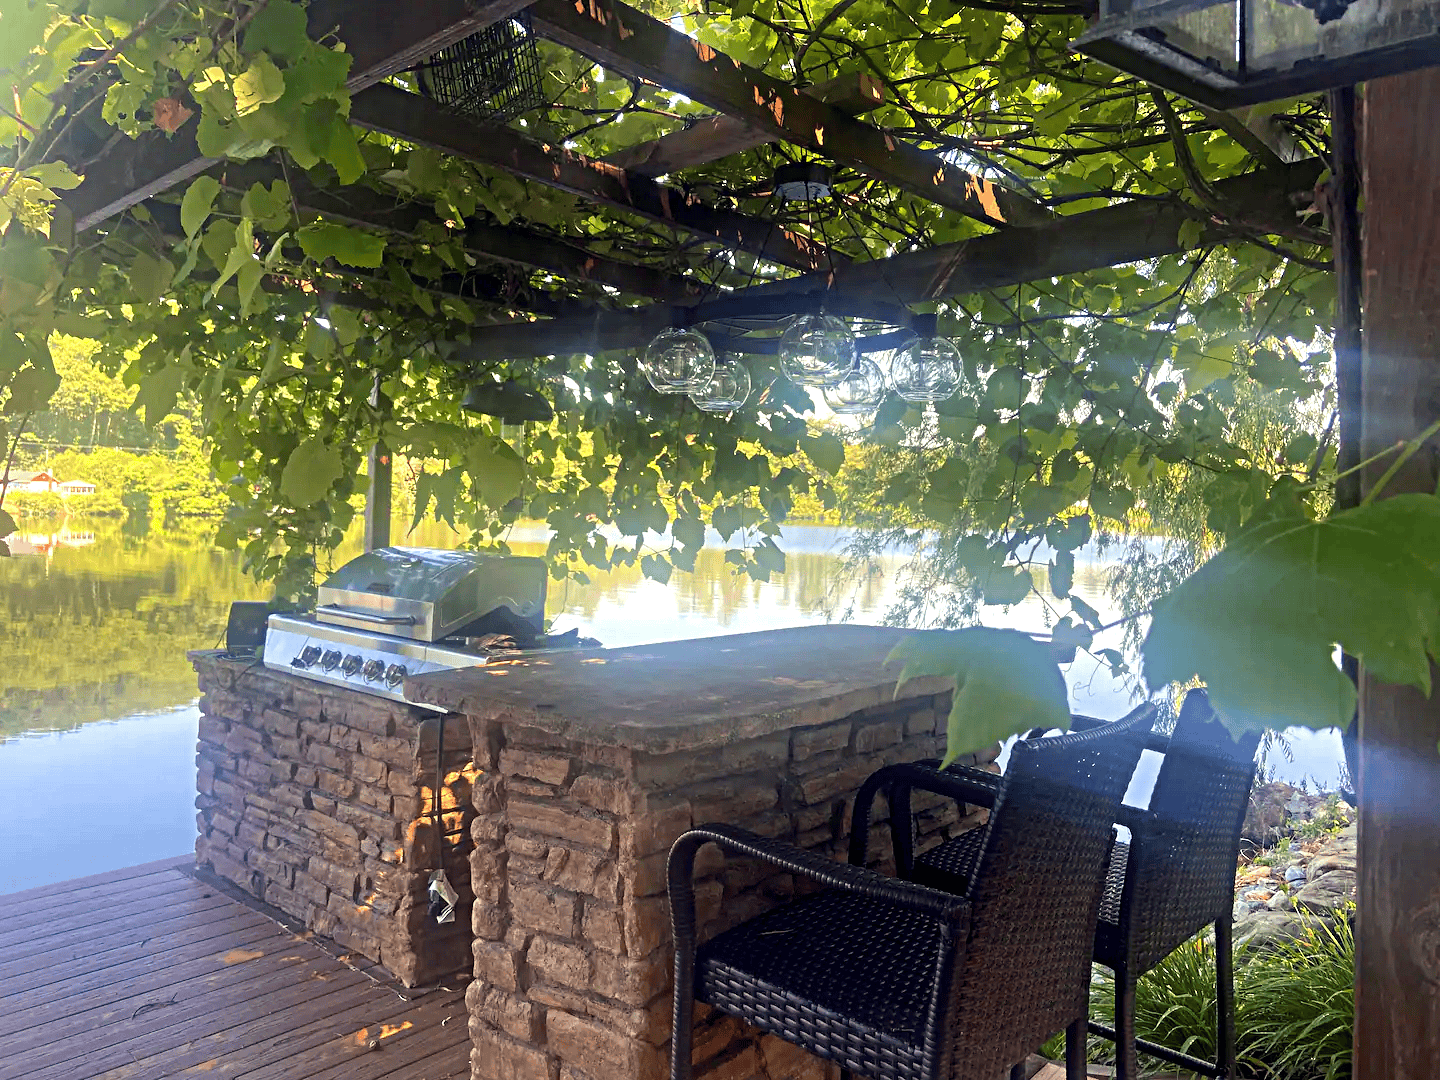 Outdoor kitchen setup on a lakeside wooden deck with a stone counter, grill, seating under a leafy pergola, ideal for short-term rental in New Hampshire.